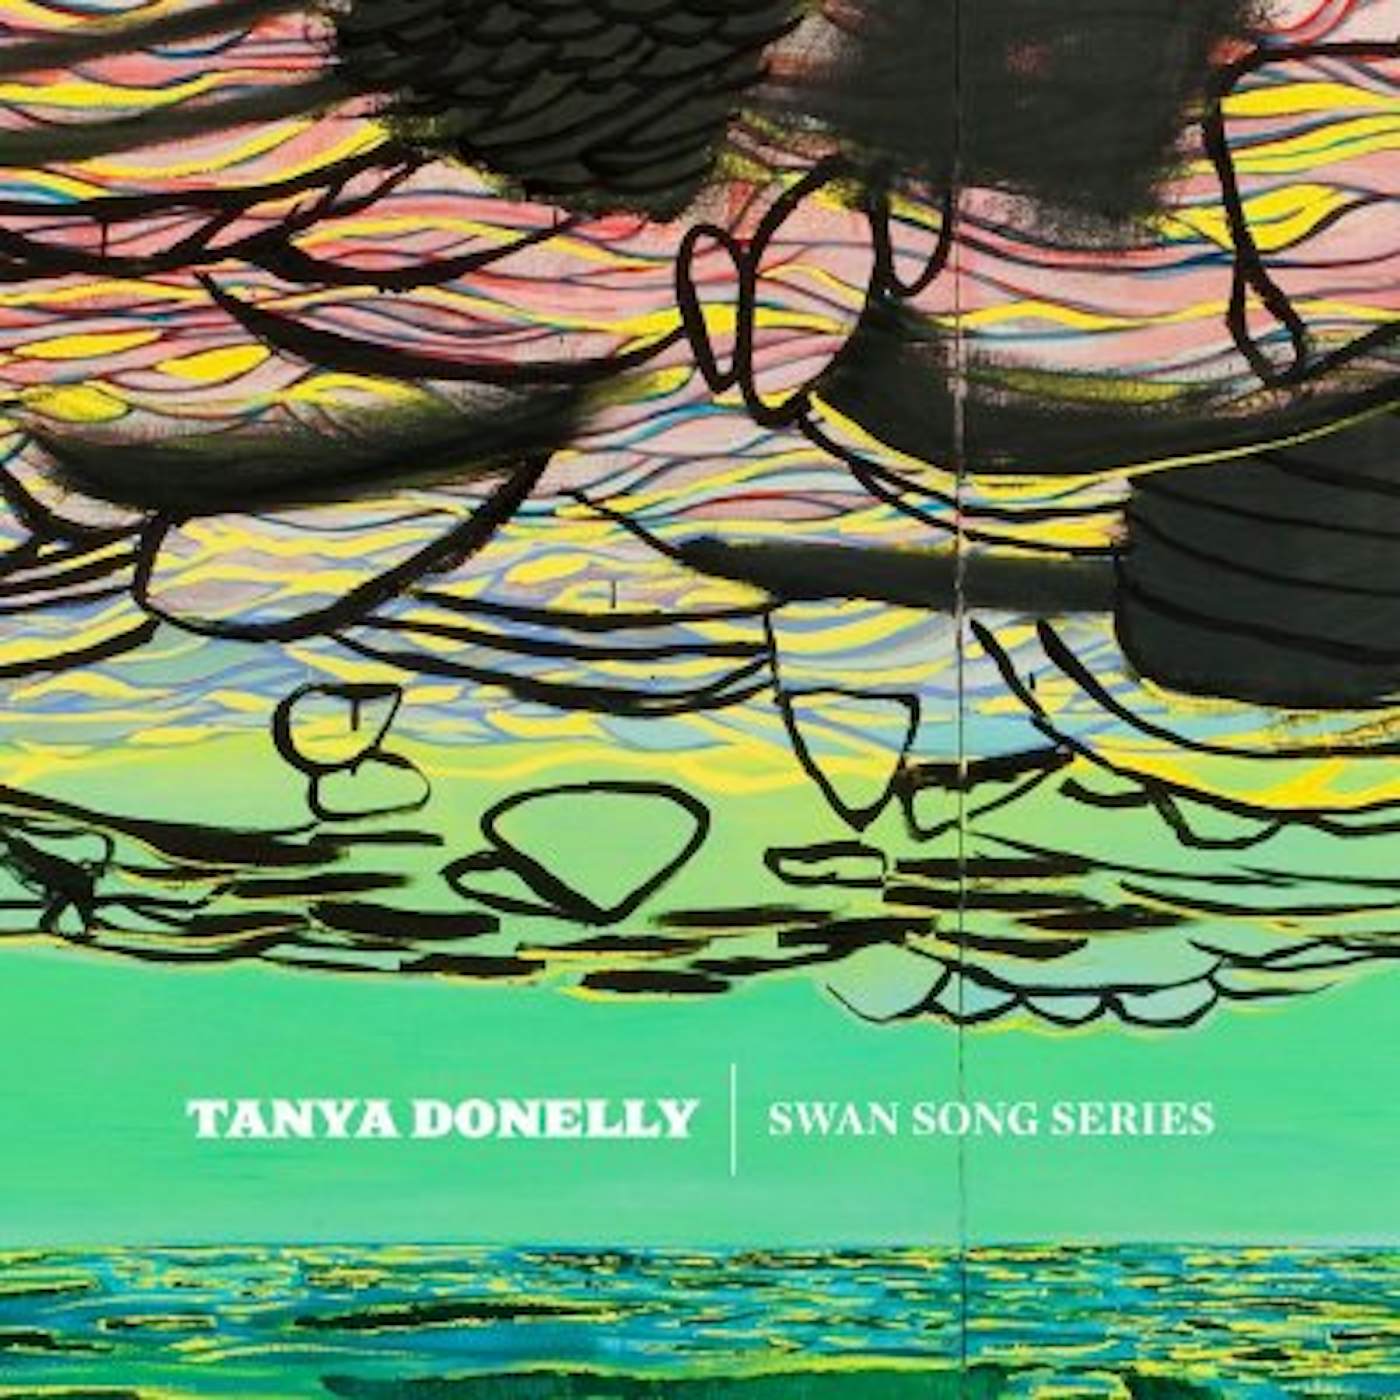 Tanya Donelly Swan Song Series Vinyl Record